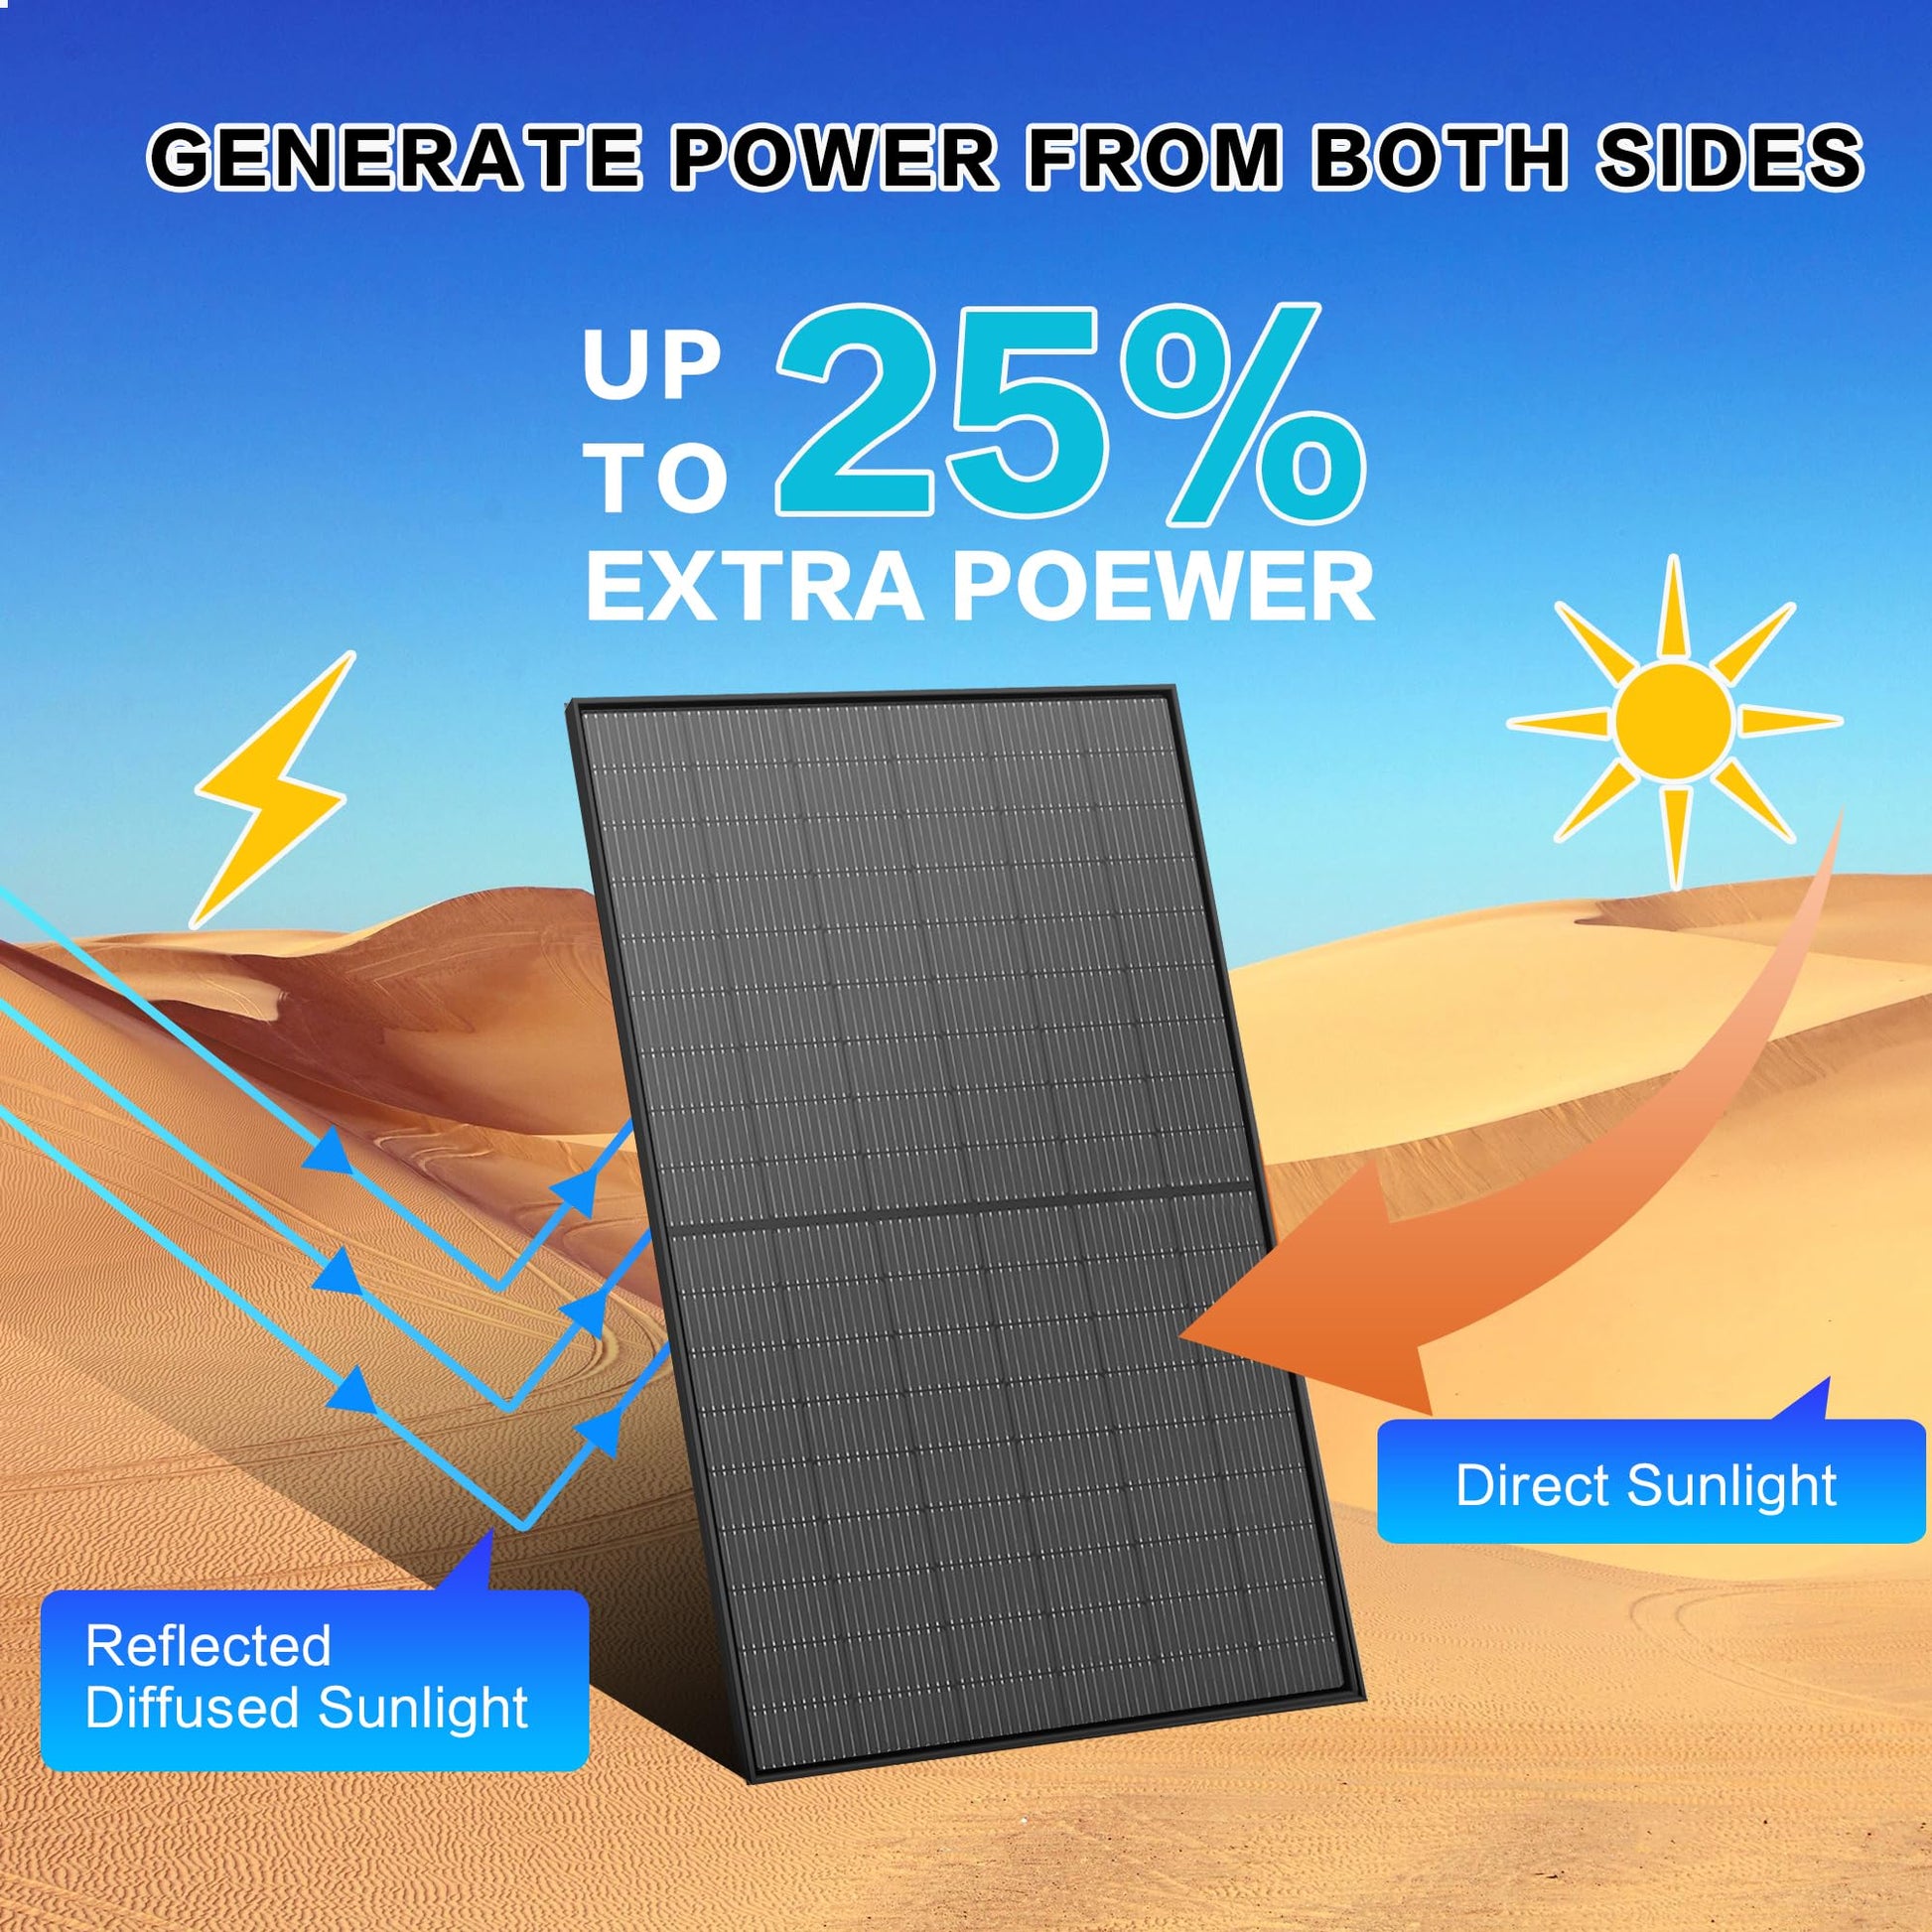 generate power from both sides